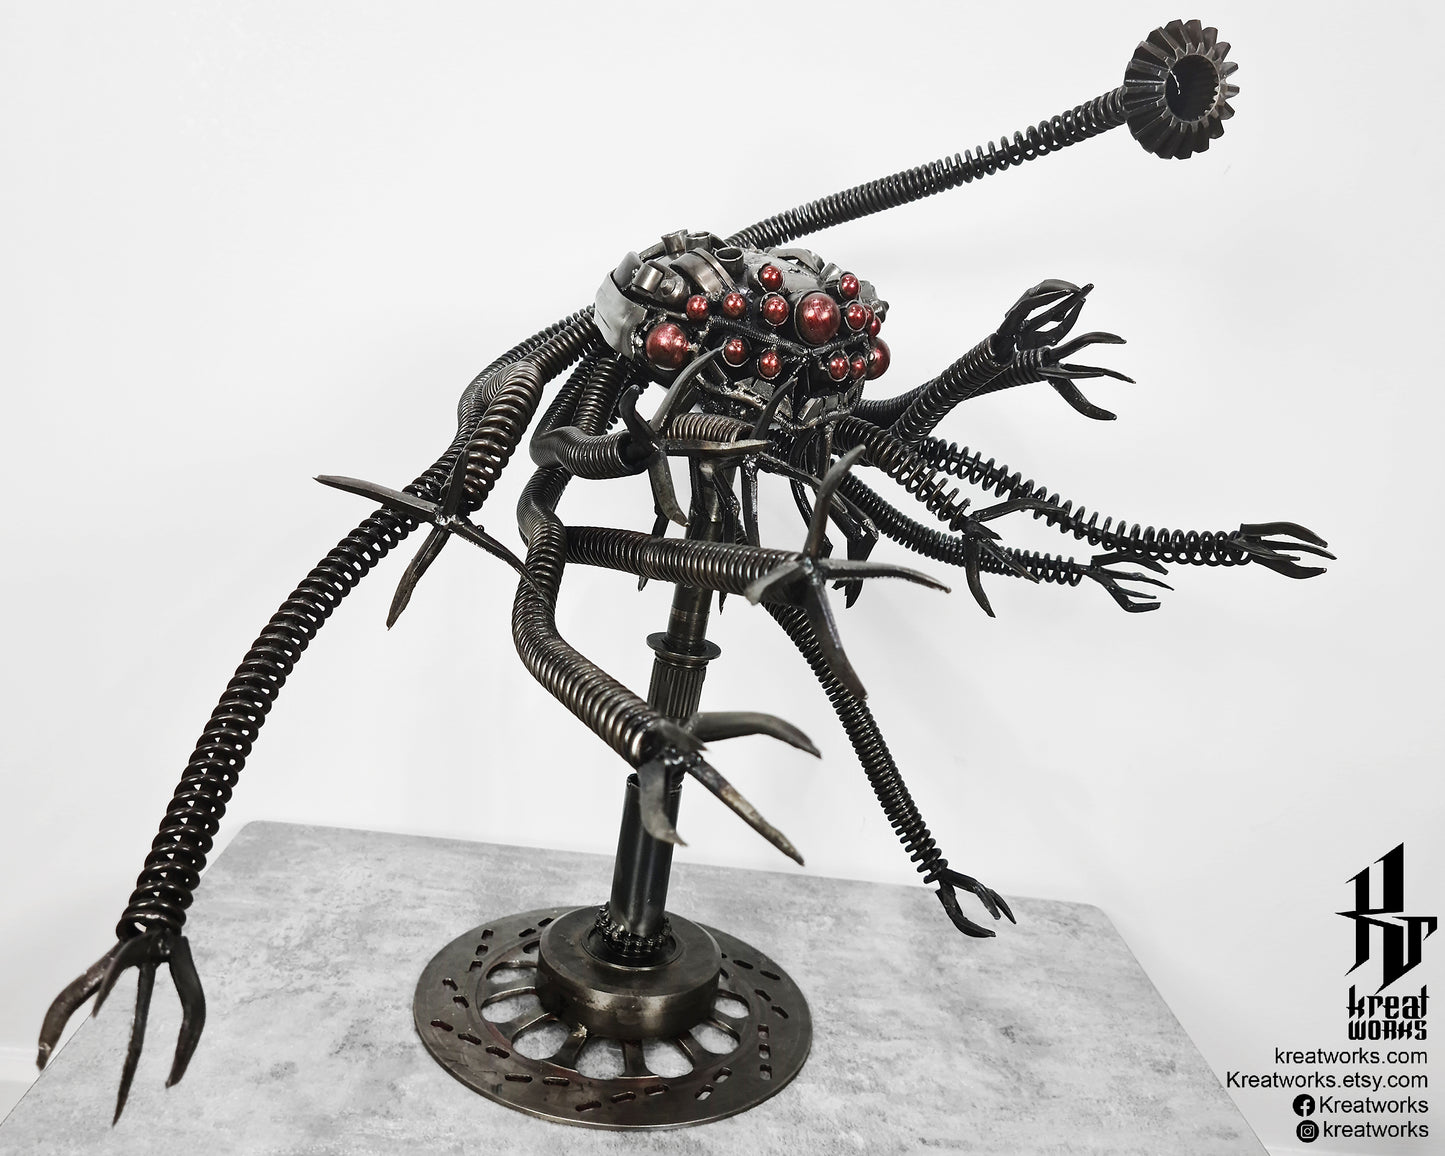 Recycled Metal Giant Squid Robot Sculpture / Recycle Metal Sustainable Sculpture Art